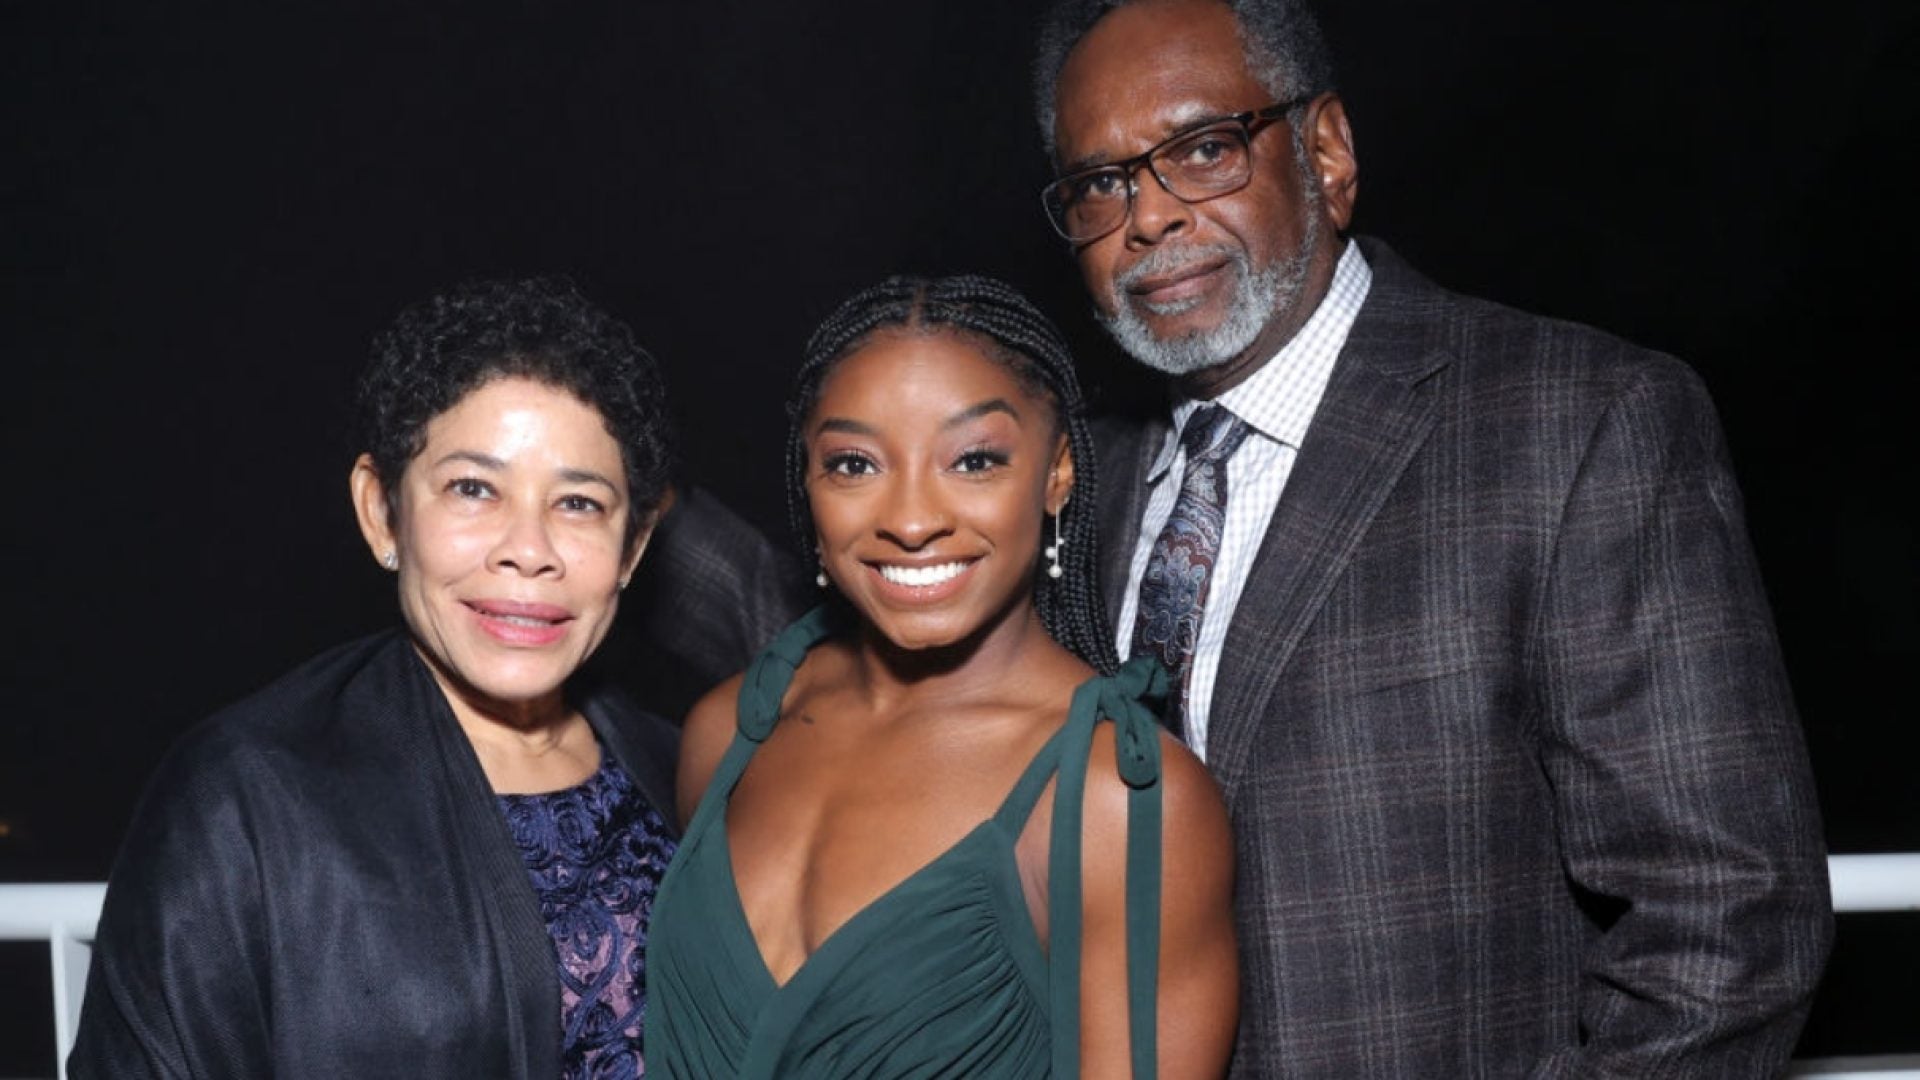 Photos Of Simone Biles And Her Family